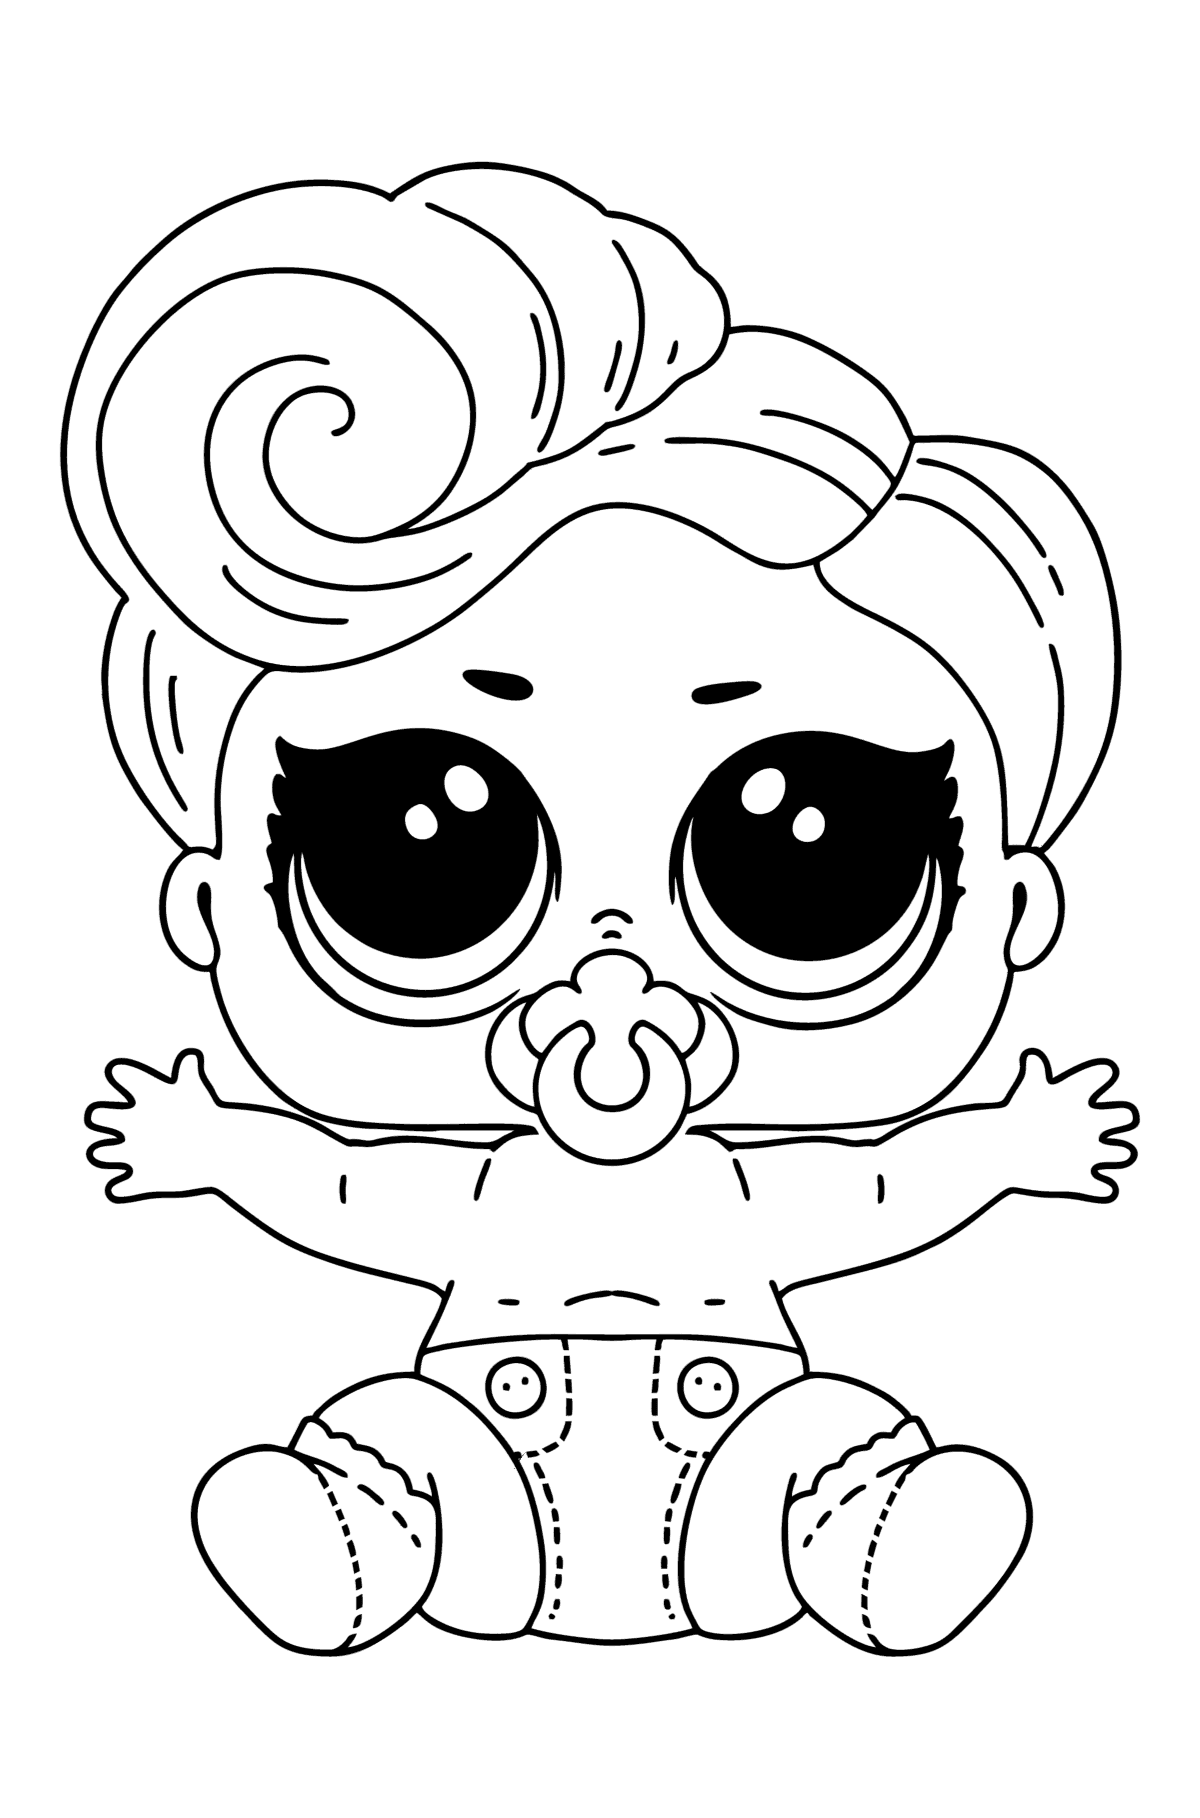 Coloring page LOL LIL Lux - Coloring Pages for Kids